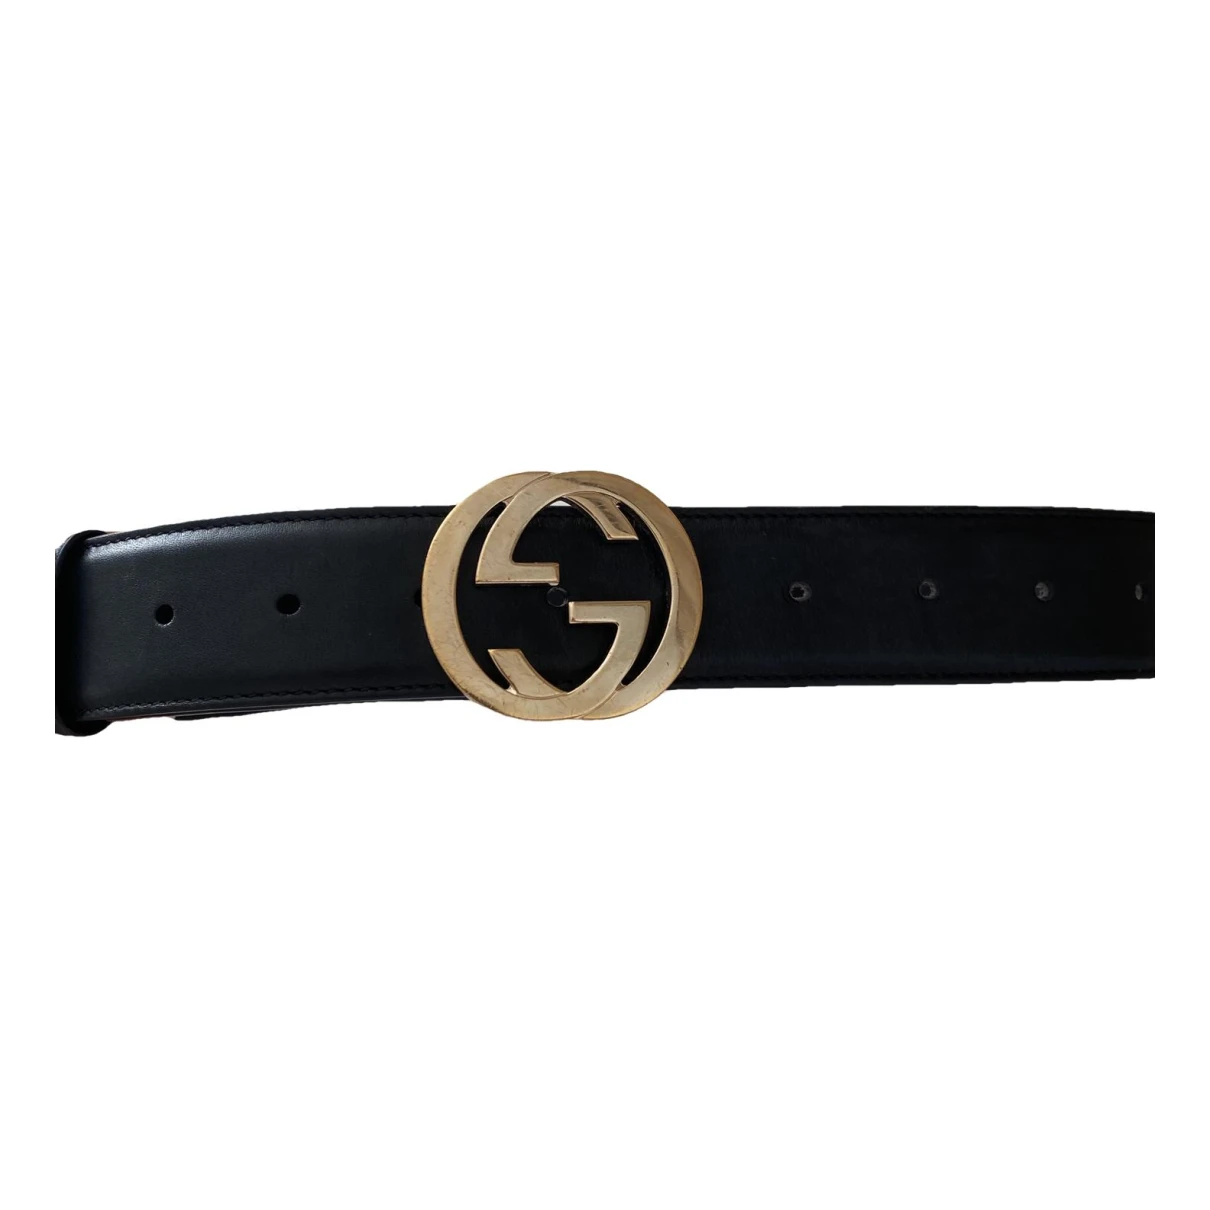 accessories Gucci belts GG Buckle for Female Leather 90 cm. Used condition